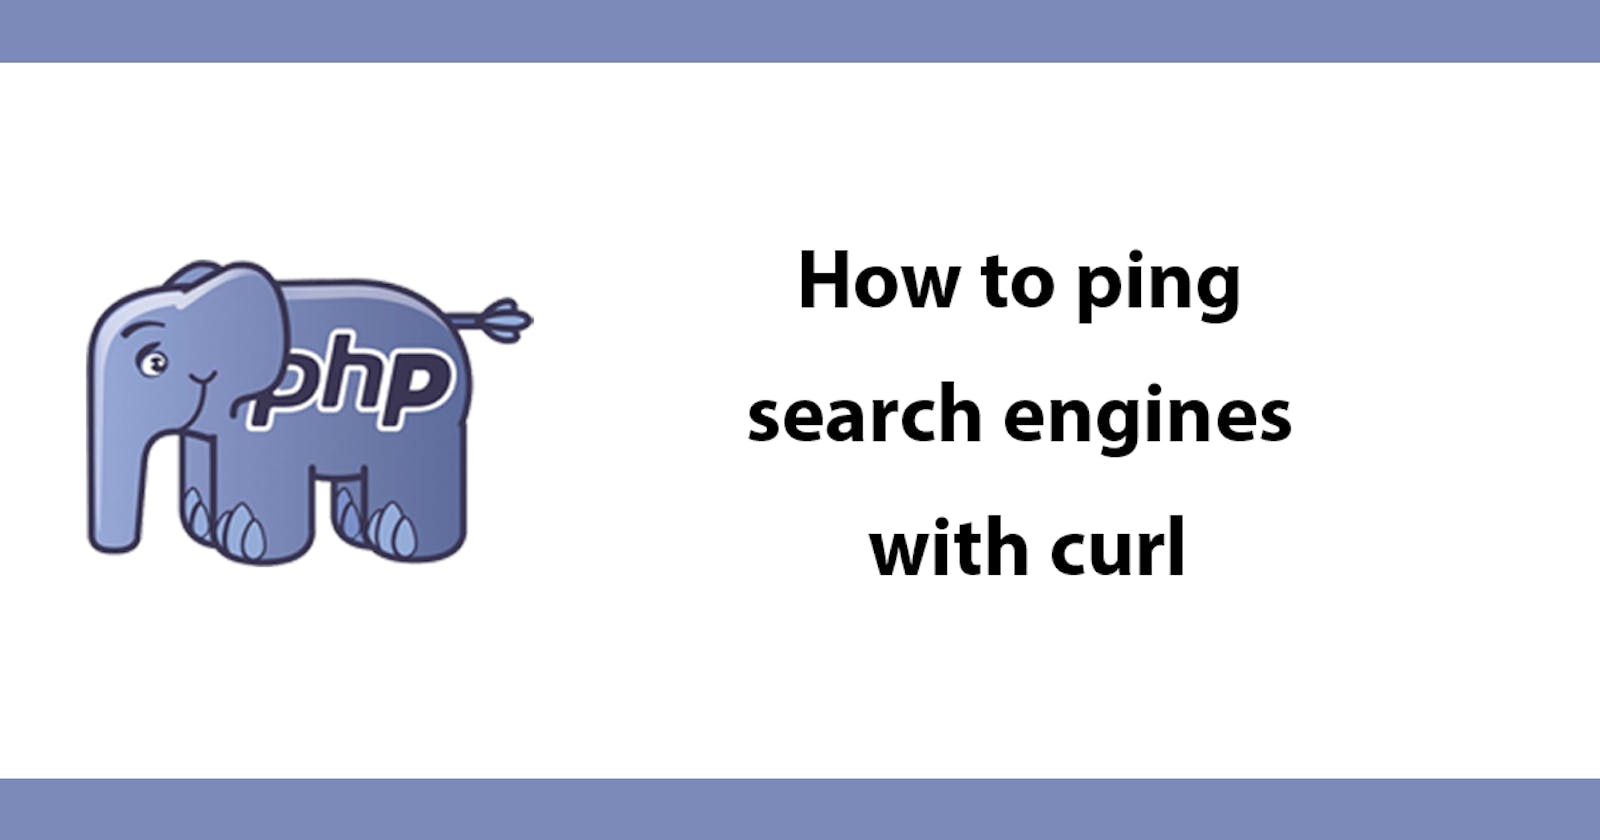 How to ping search engines with curl